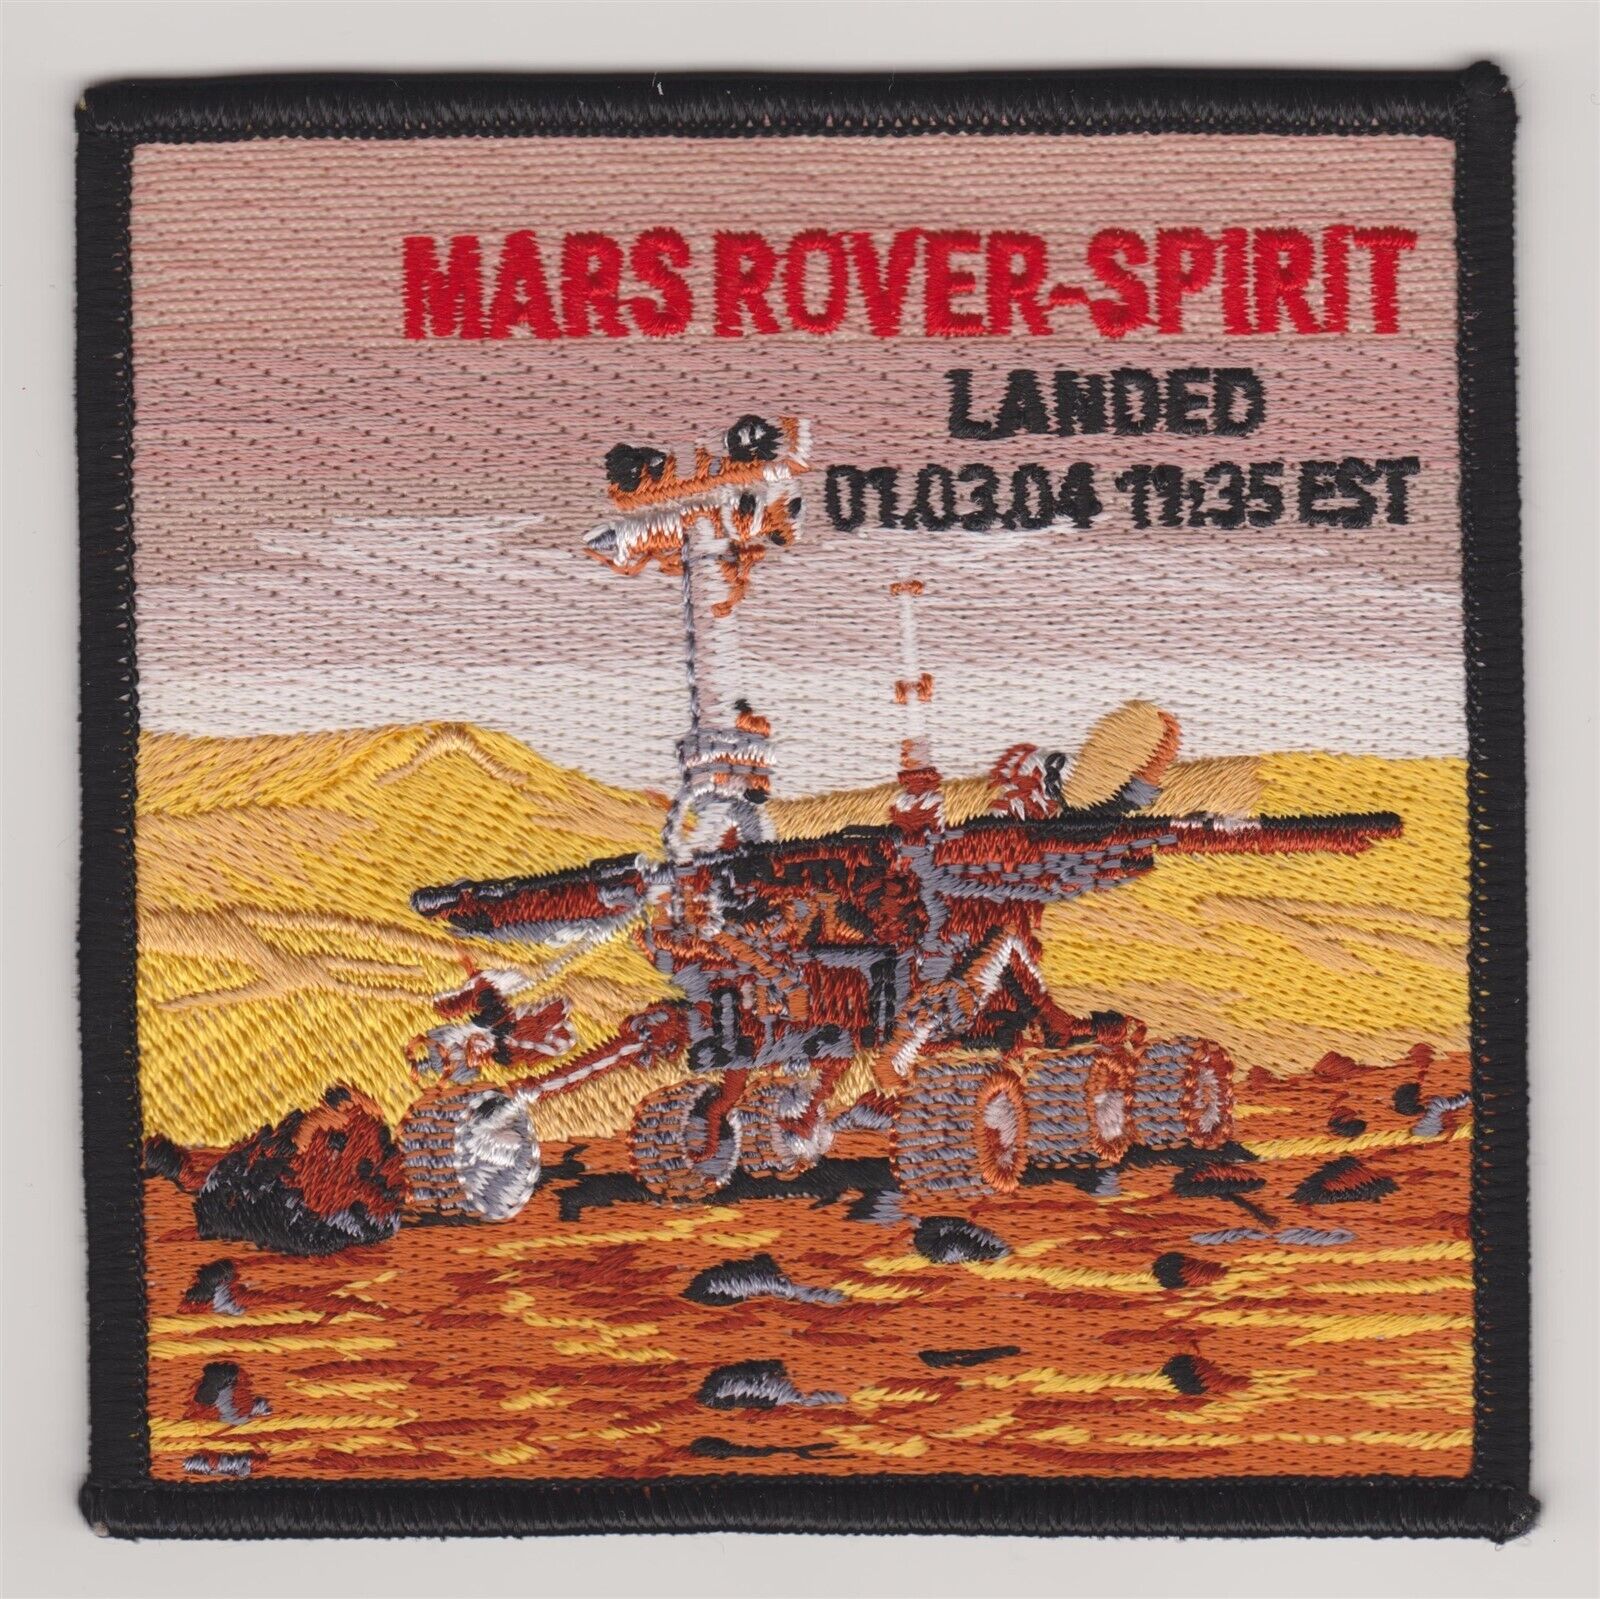 NASA JPL Mars Mission Rover Spirit Embroidered Iron On Patch *New* #544